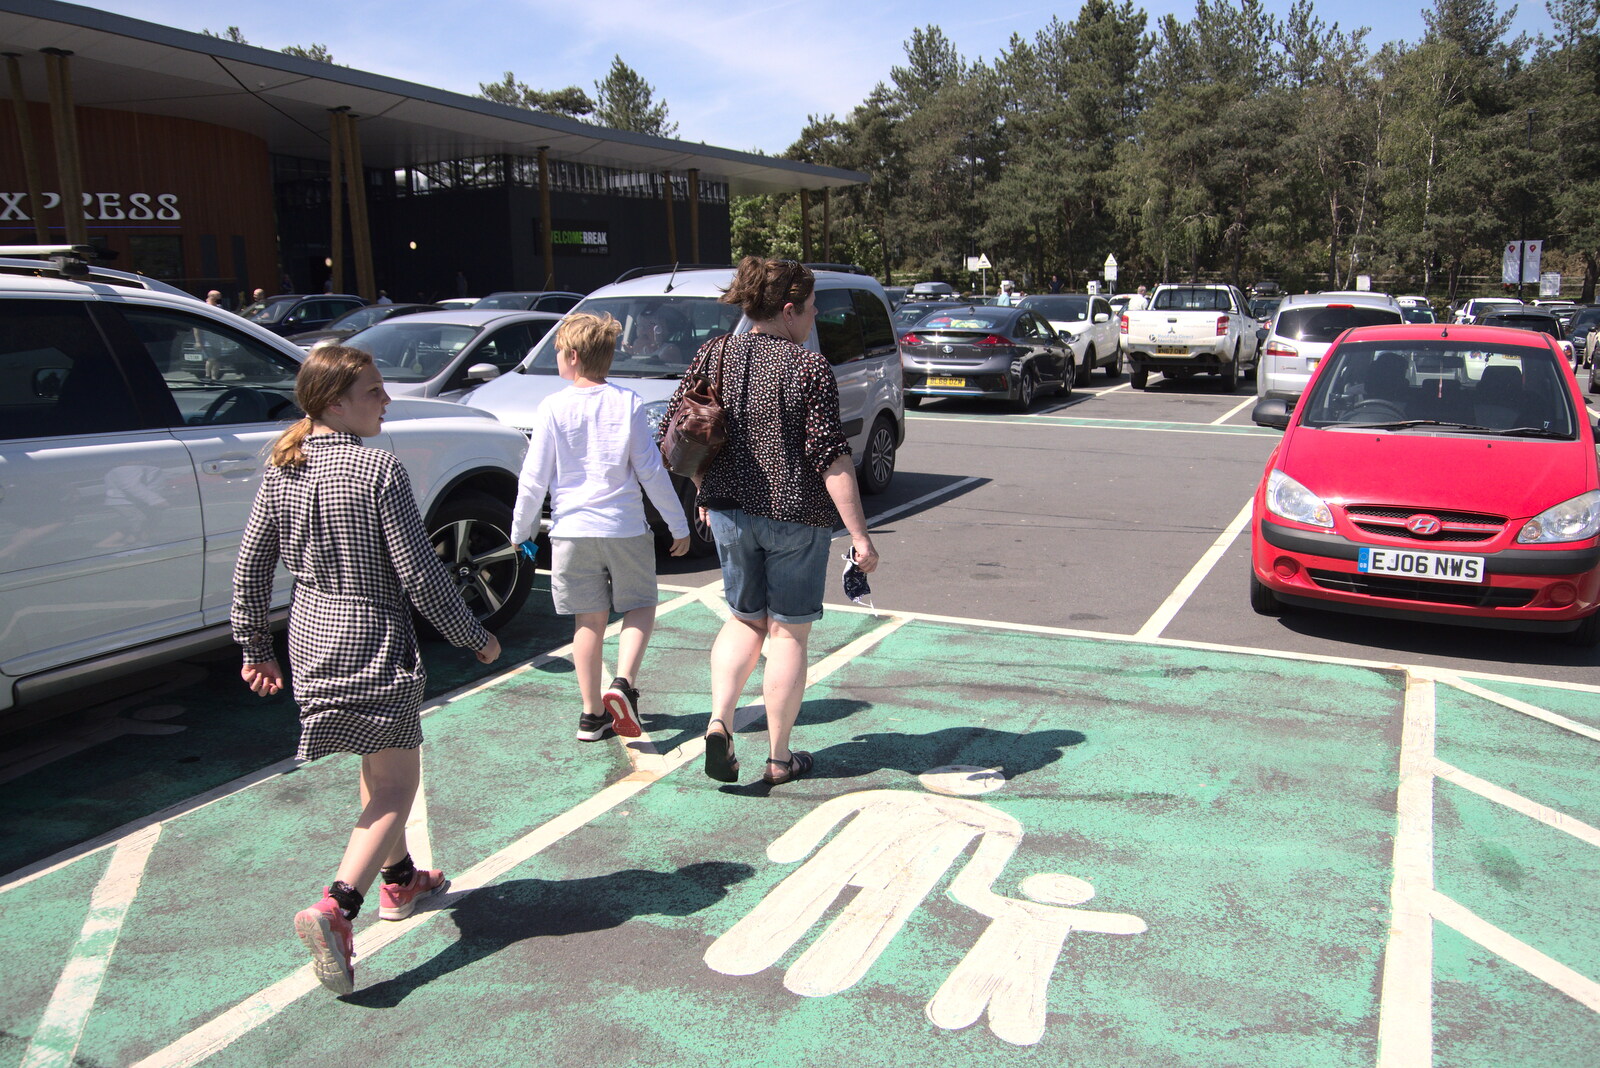 We stop off at Fleet Services on the M3 from A Trip to Grandma J's, Spreyton, Devon - 2nd June 2021